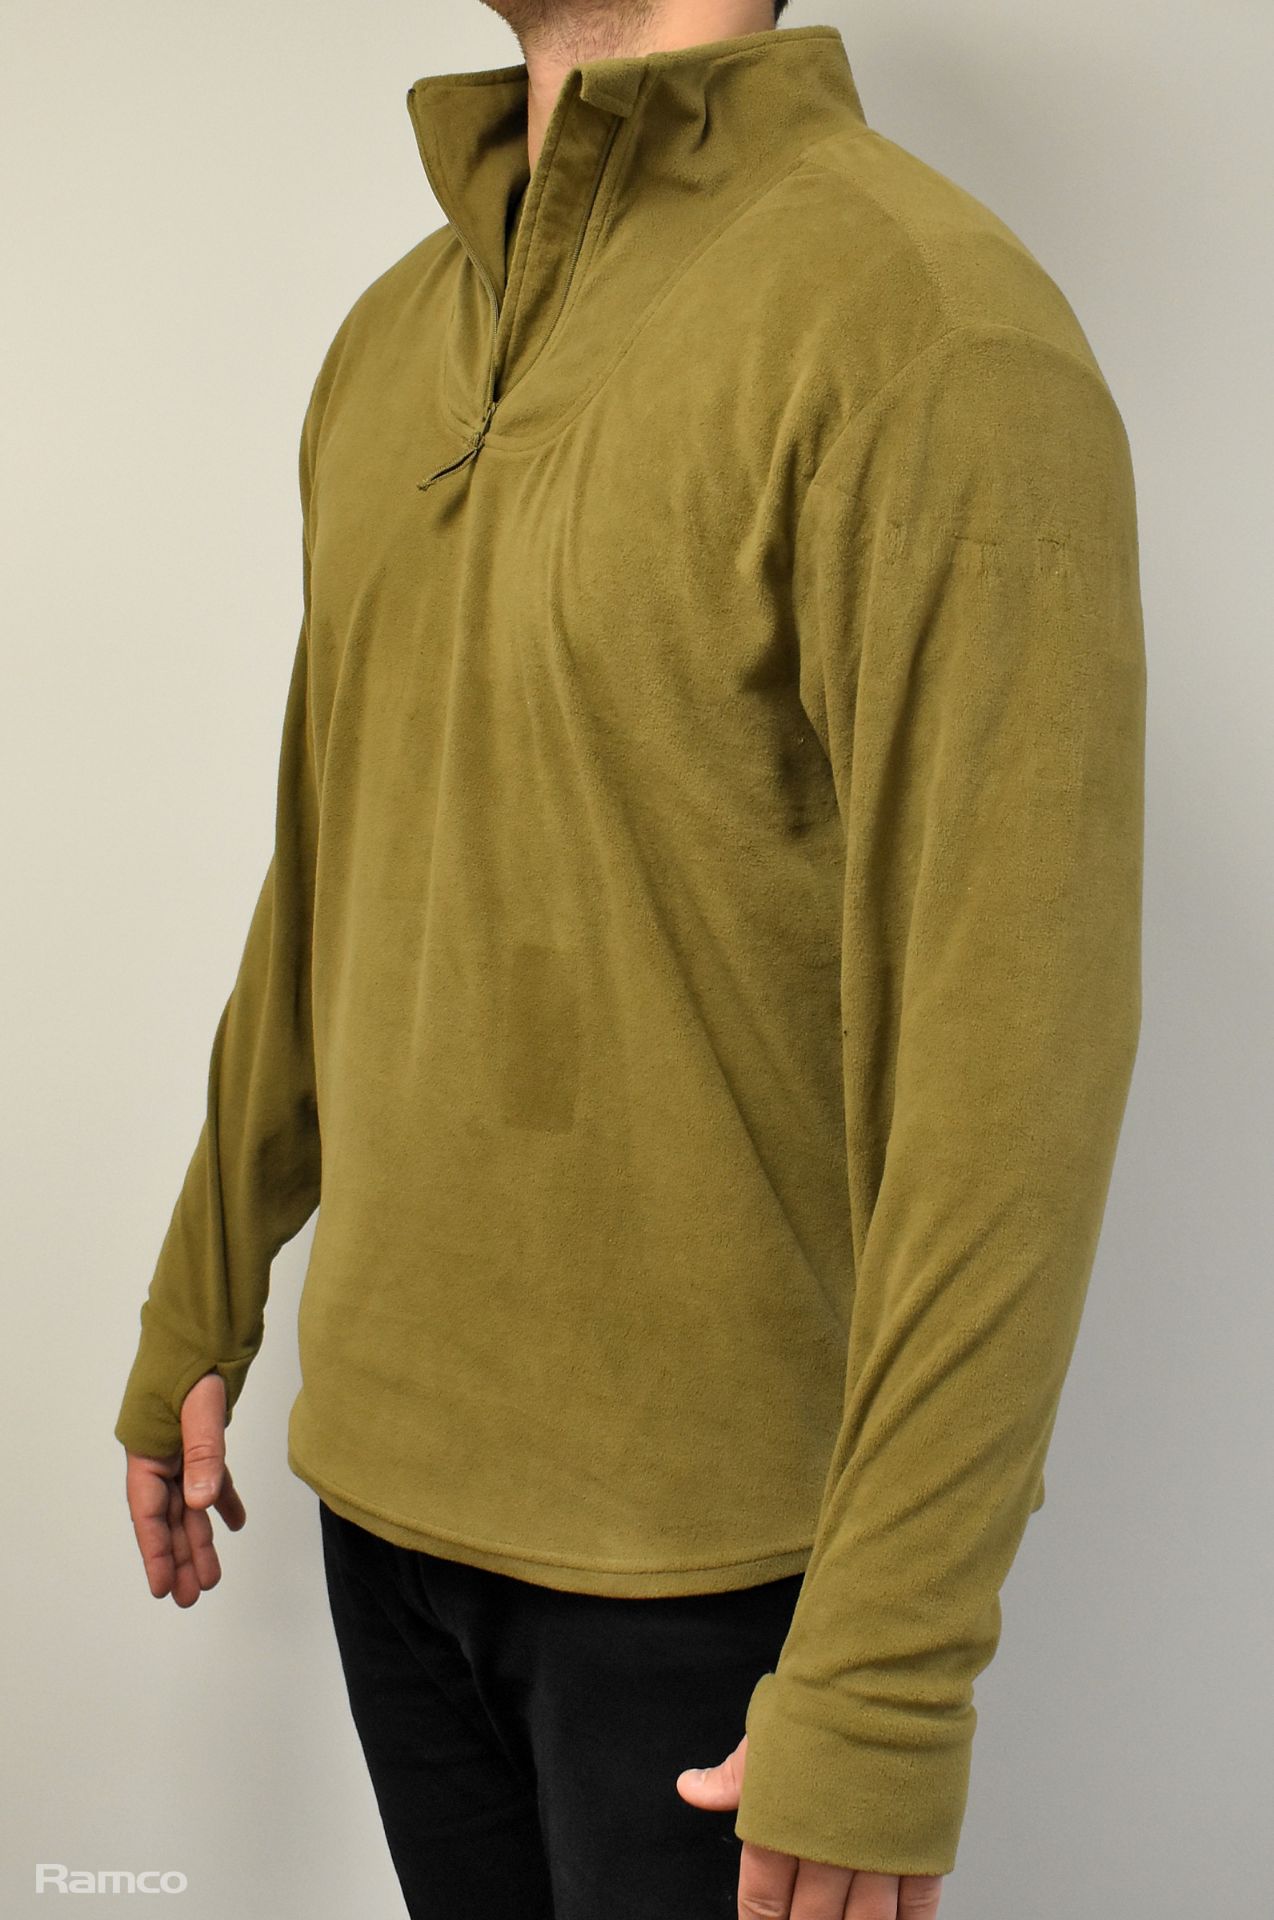 100x British Army Combat thermal undershirts - mixed colours - mixed grades and sizes - Image 2 of 10